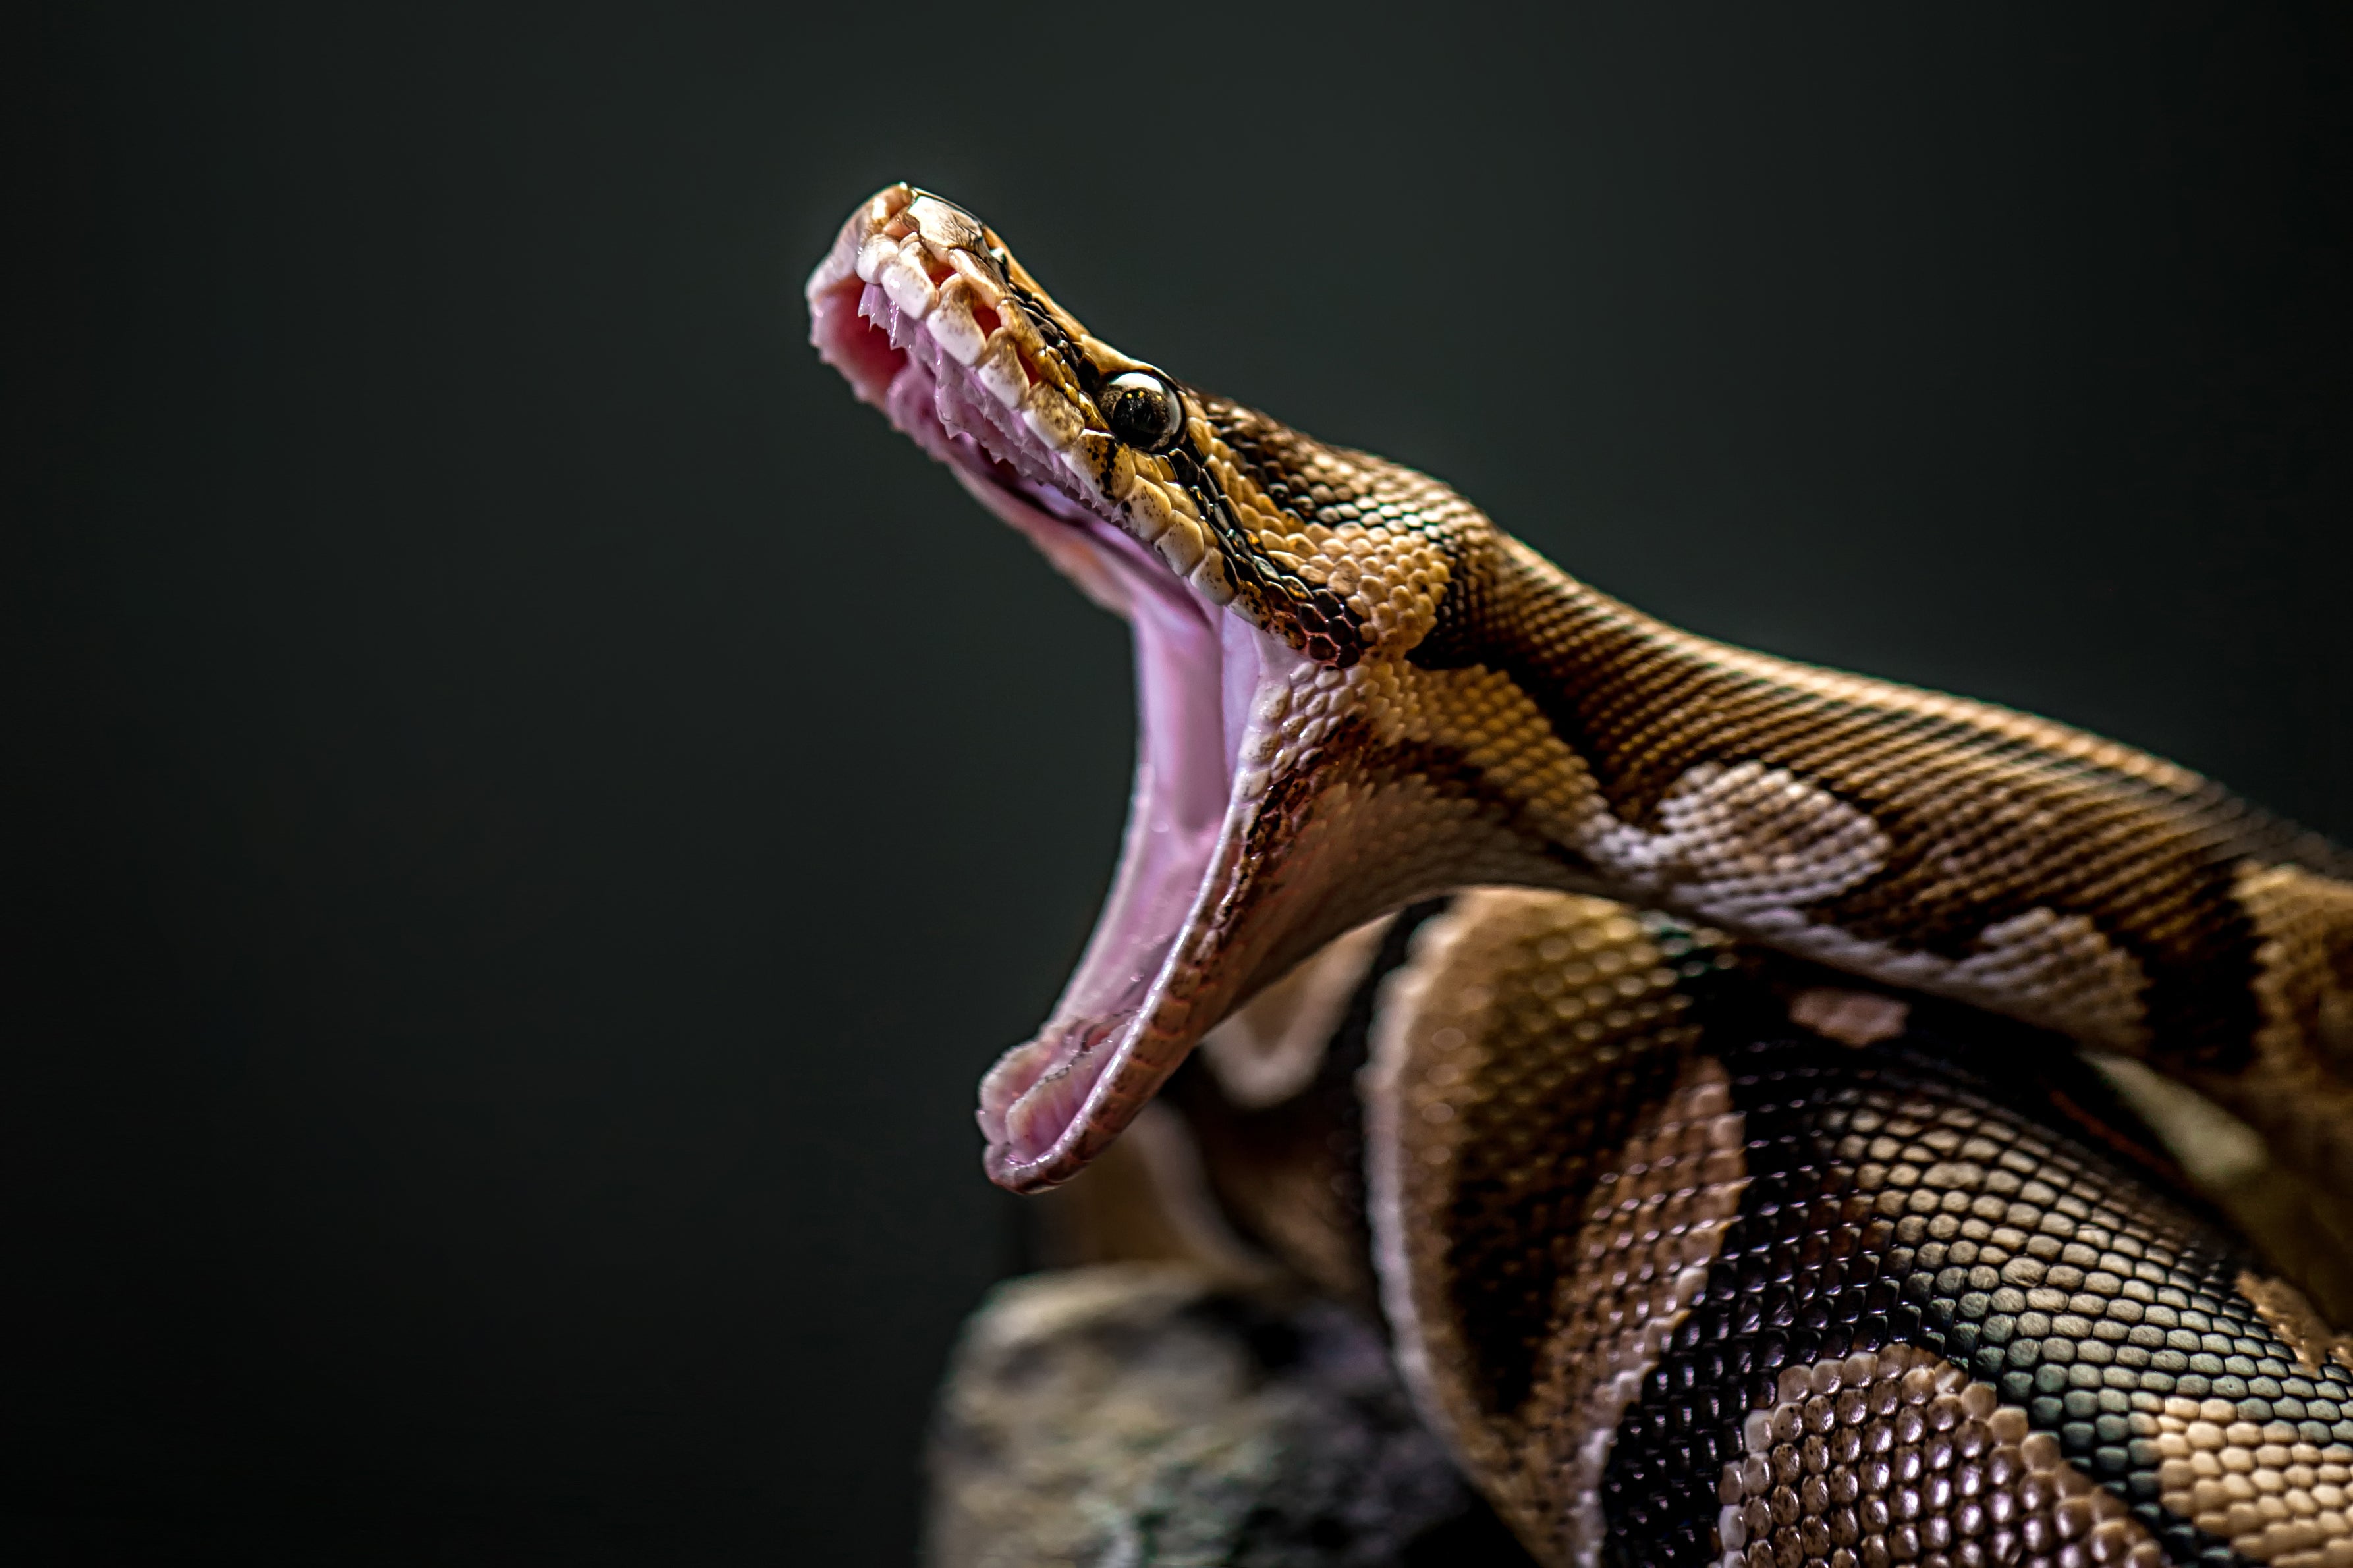 Here's How a Python Jaw Can Fit a Whole Deer - Scientific American